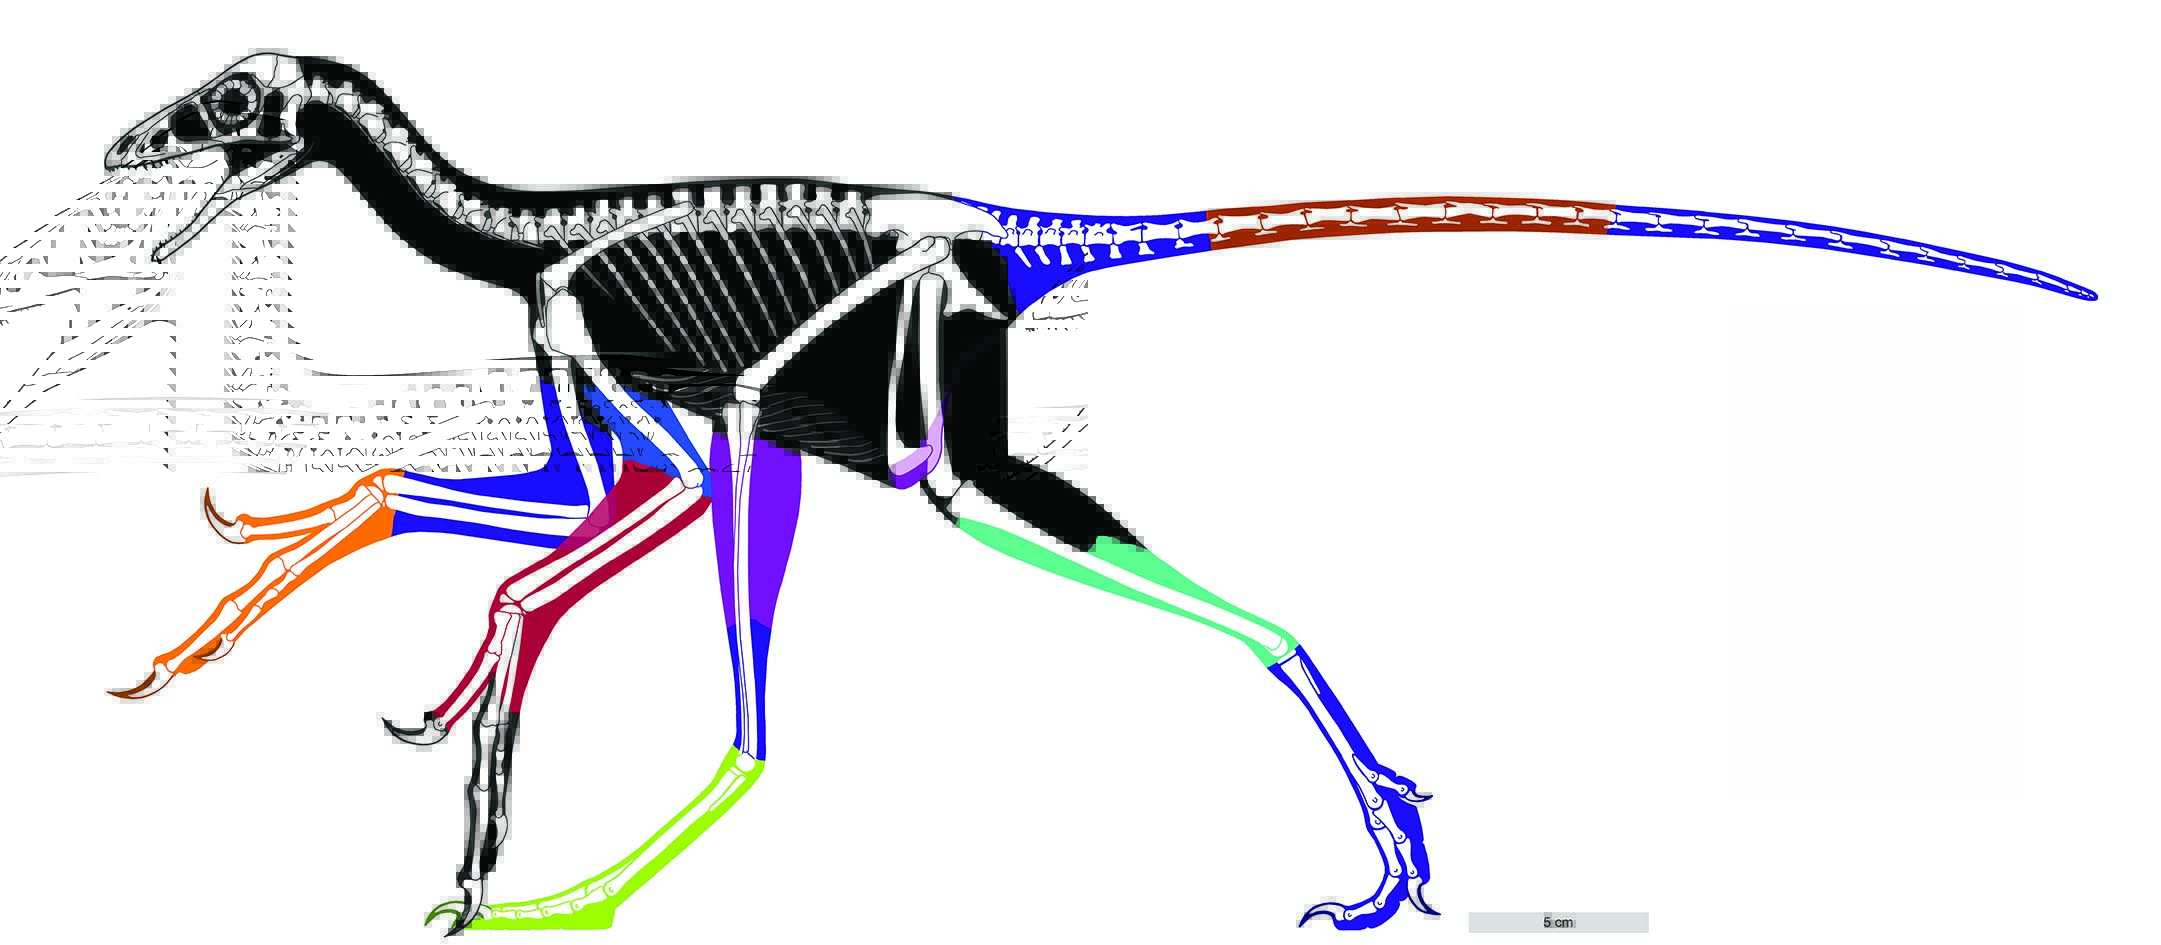 This Laser Reconstruction Of A Four-Winged Dinosaur Is Incredible